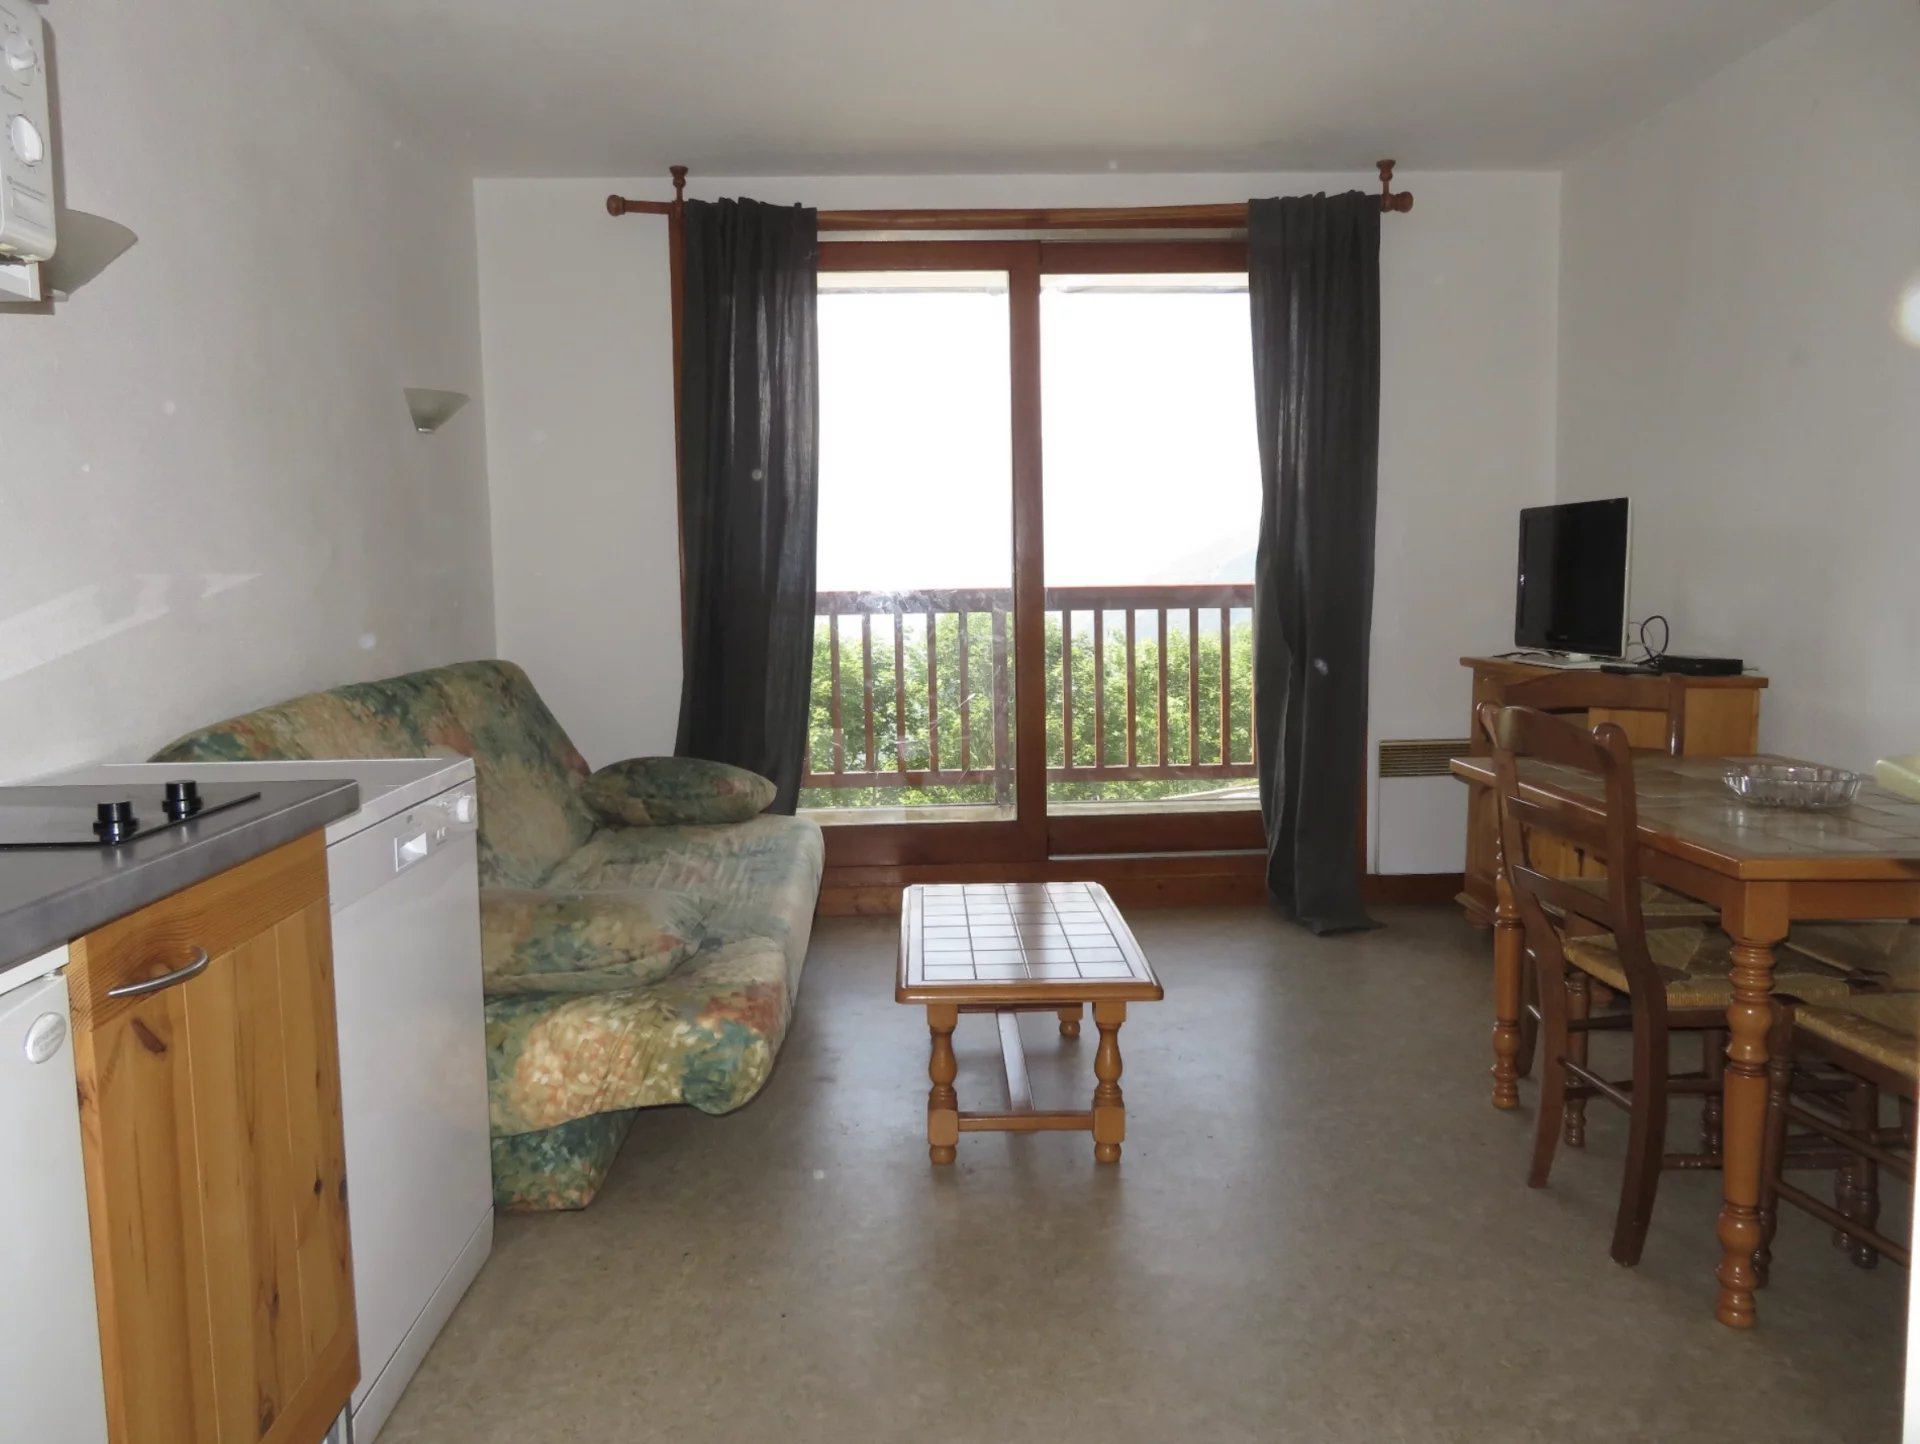 3-room apartment with stunning view  - Vaujany